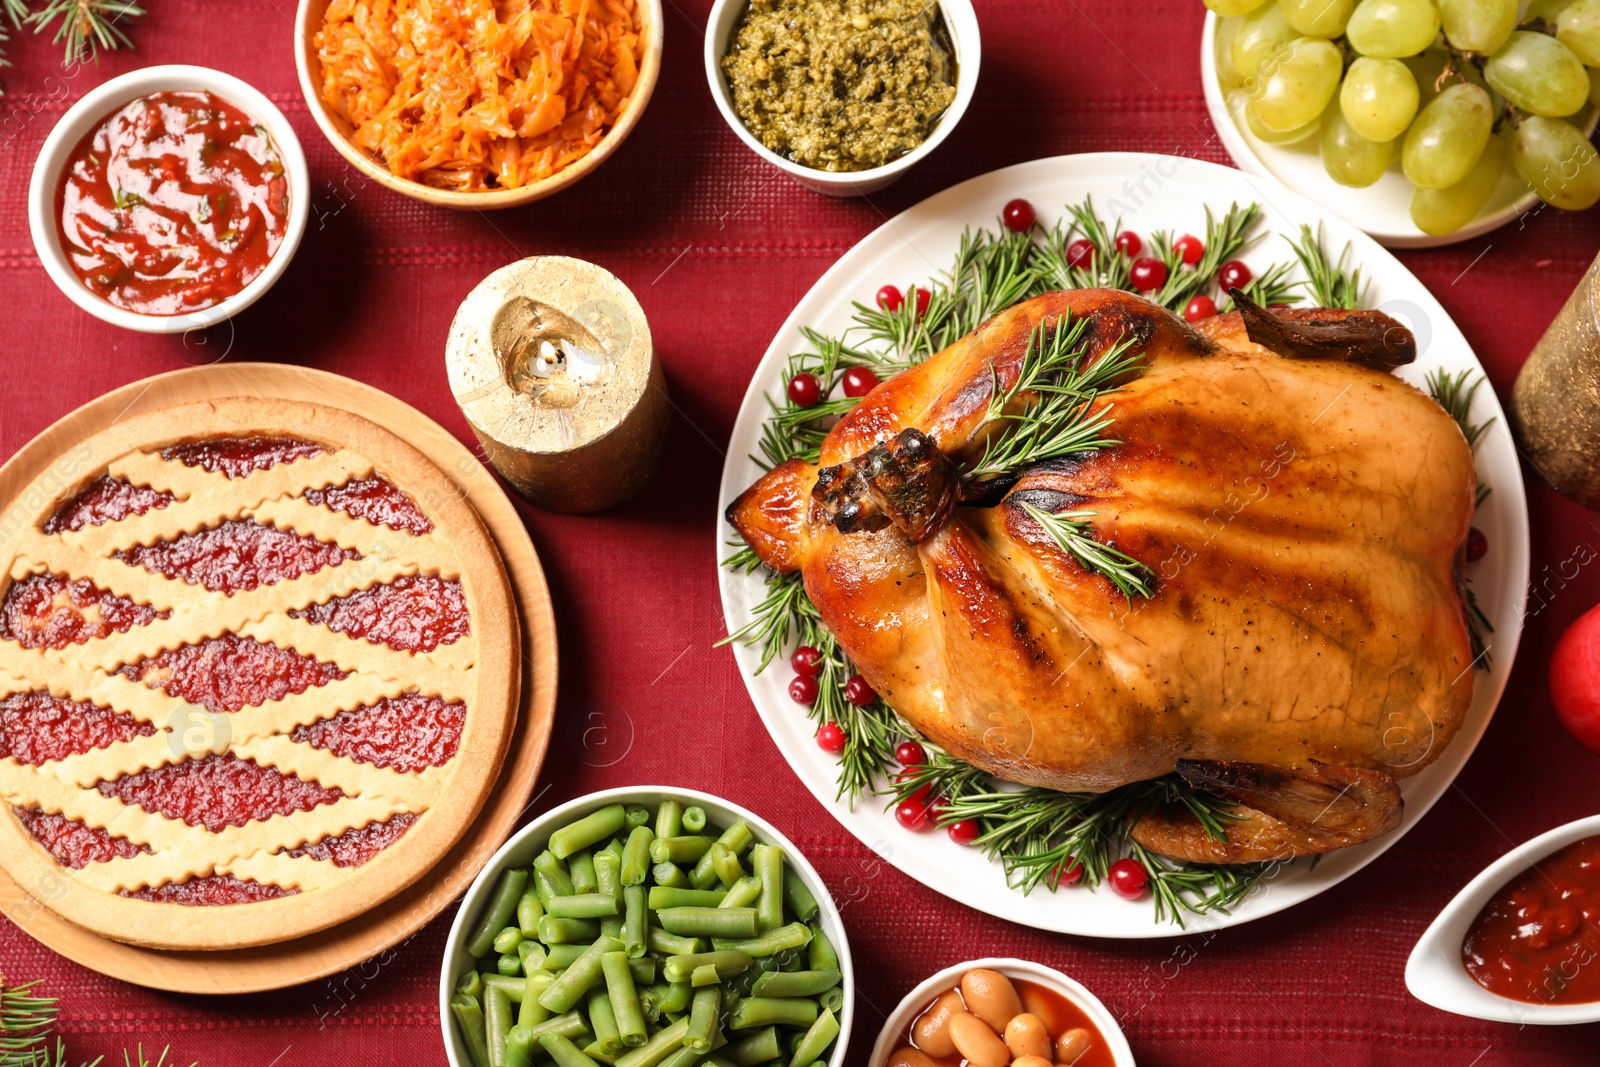 Photo of Traditional festive dinner with delicious roasted turkey served on table, flat lay